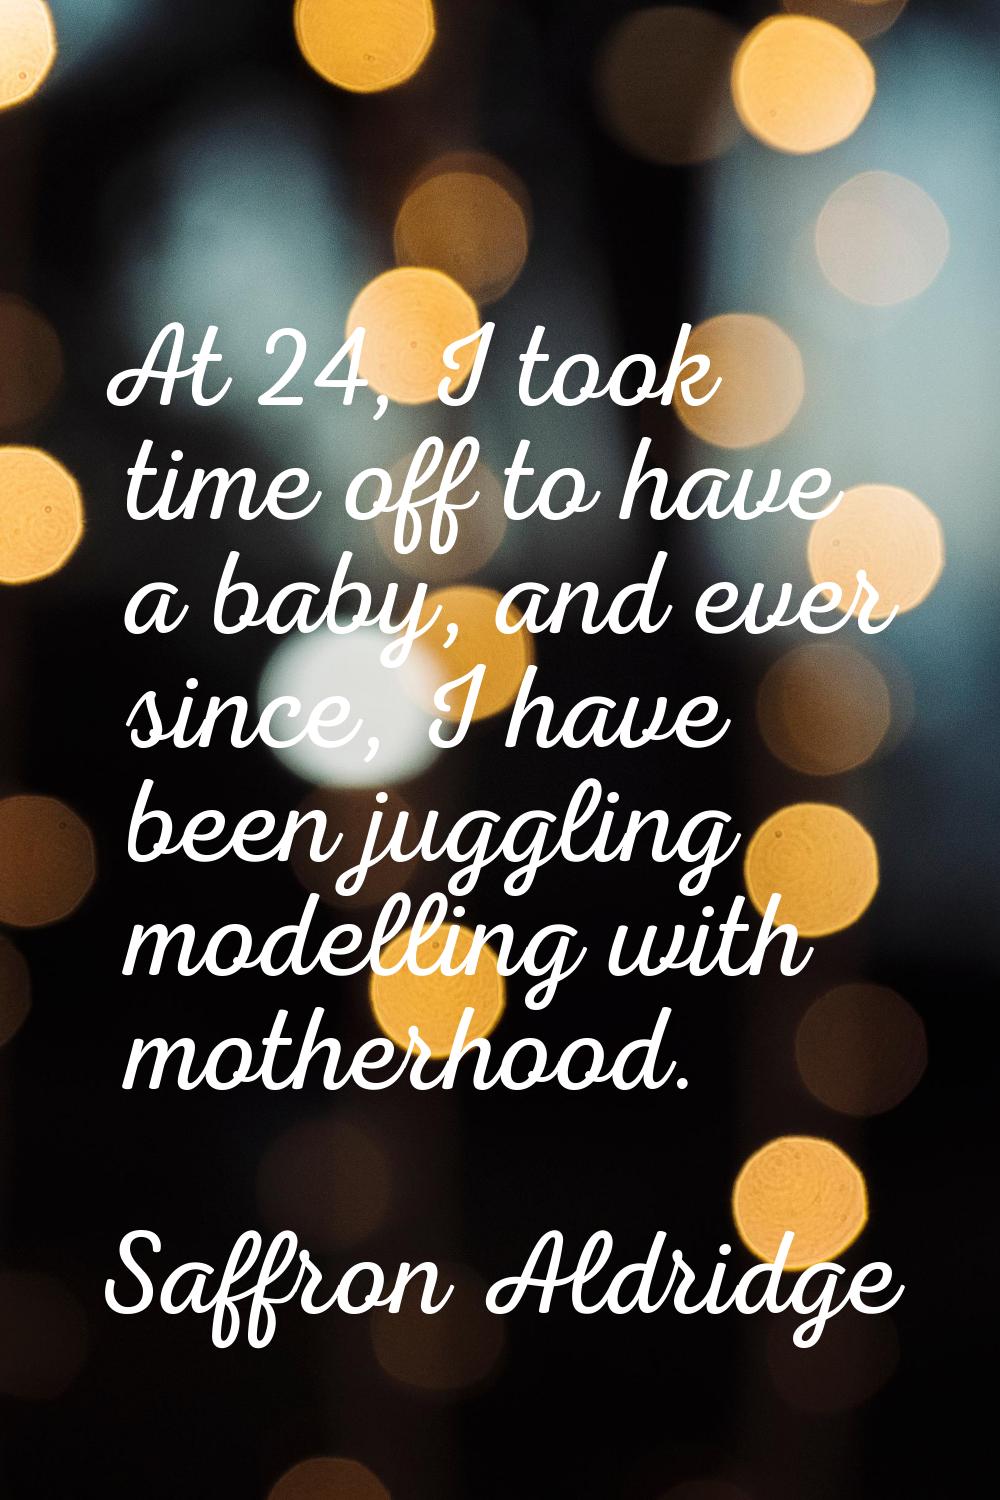 At 24, I took time off to have a baby, and ever since, I have been juggling modelling with motherho